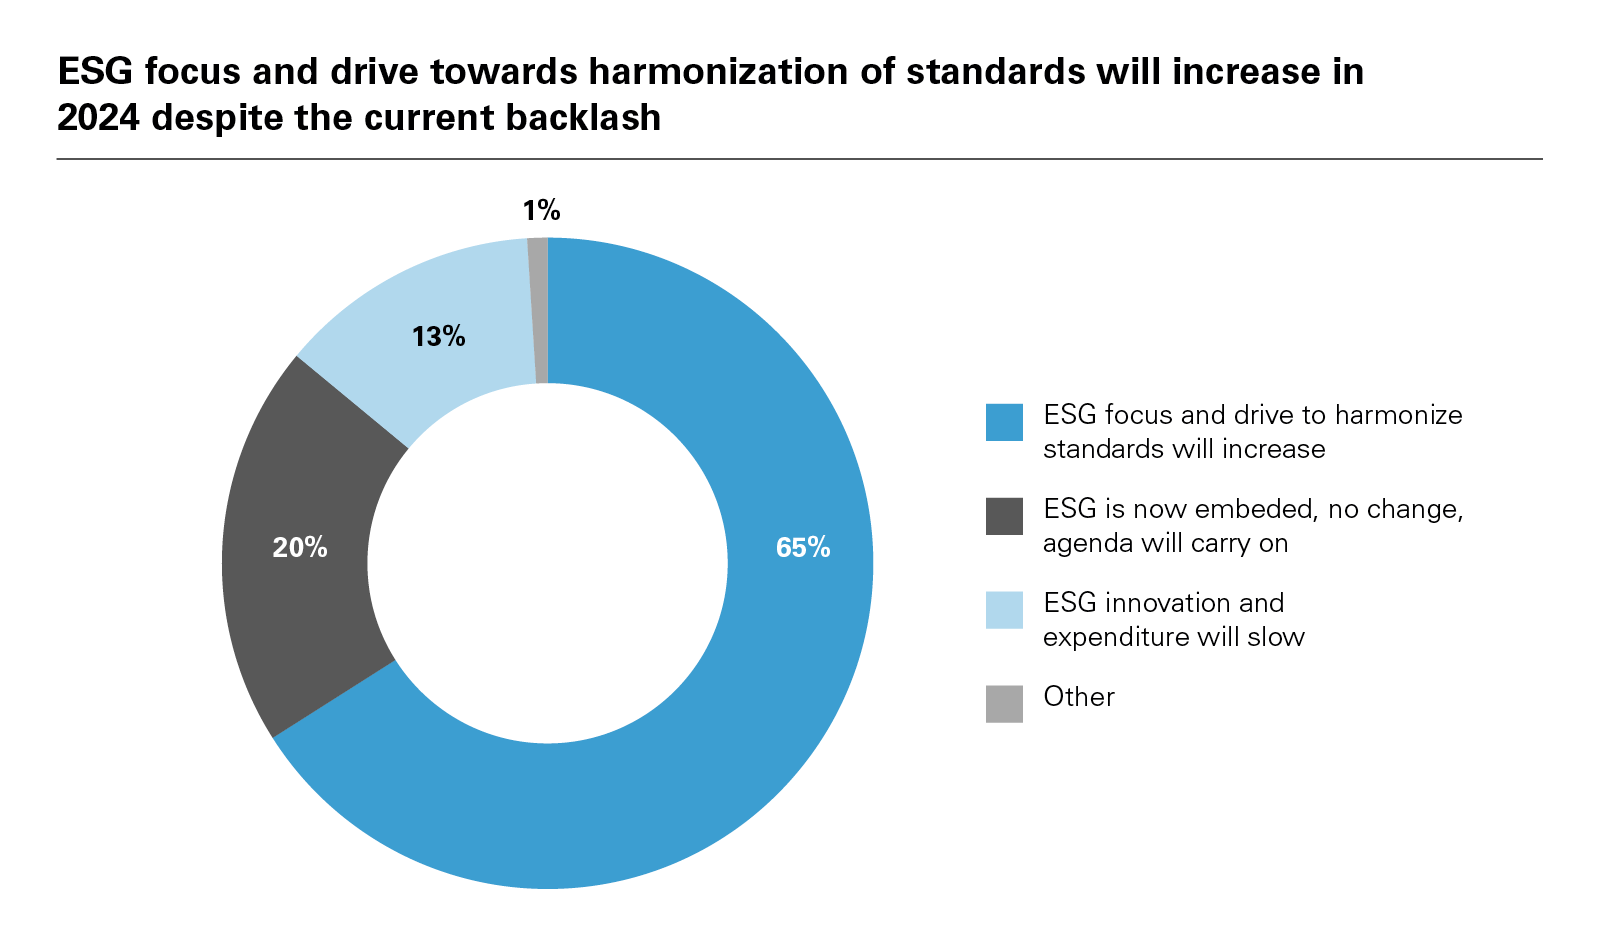 ESG focus and drive towards harmonization of standards will increase in 2024 despite the current backlash